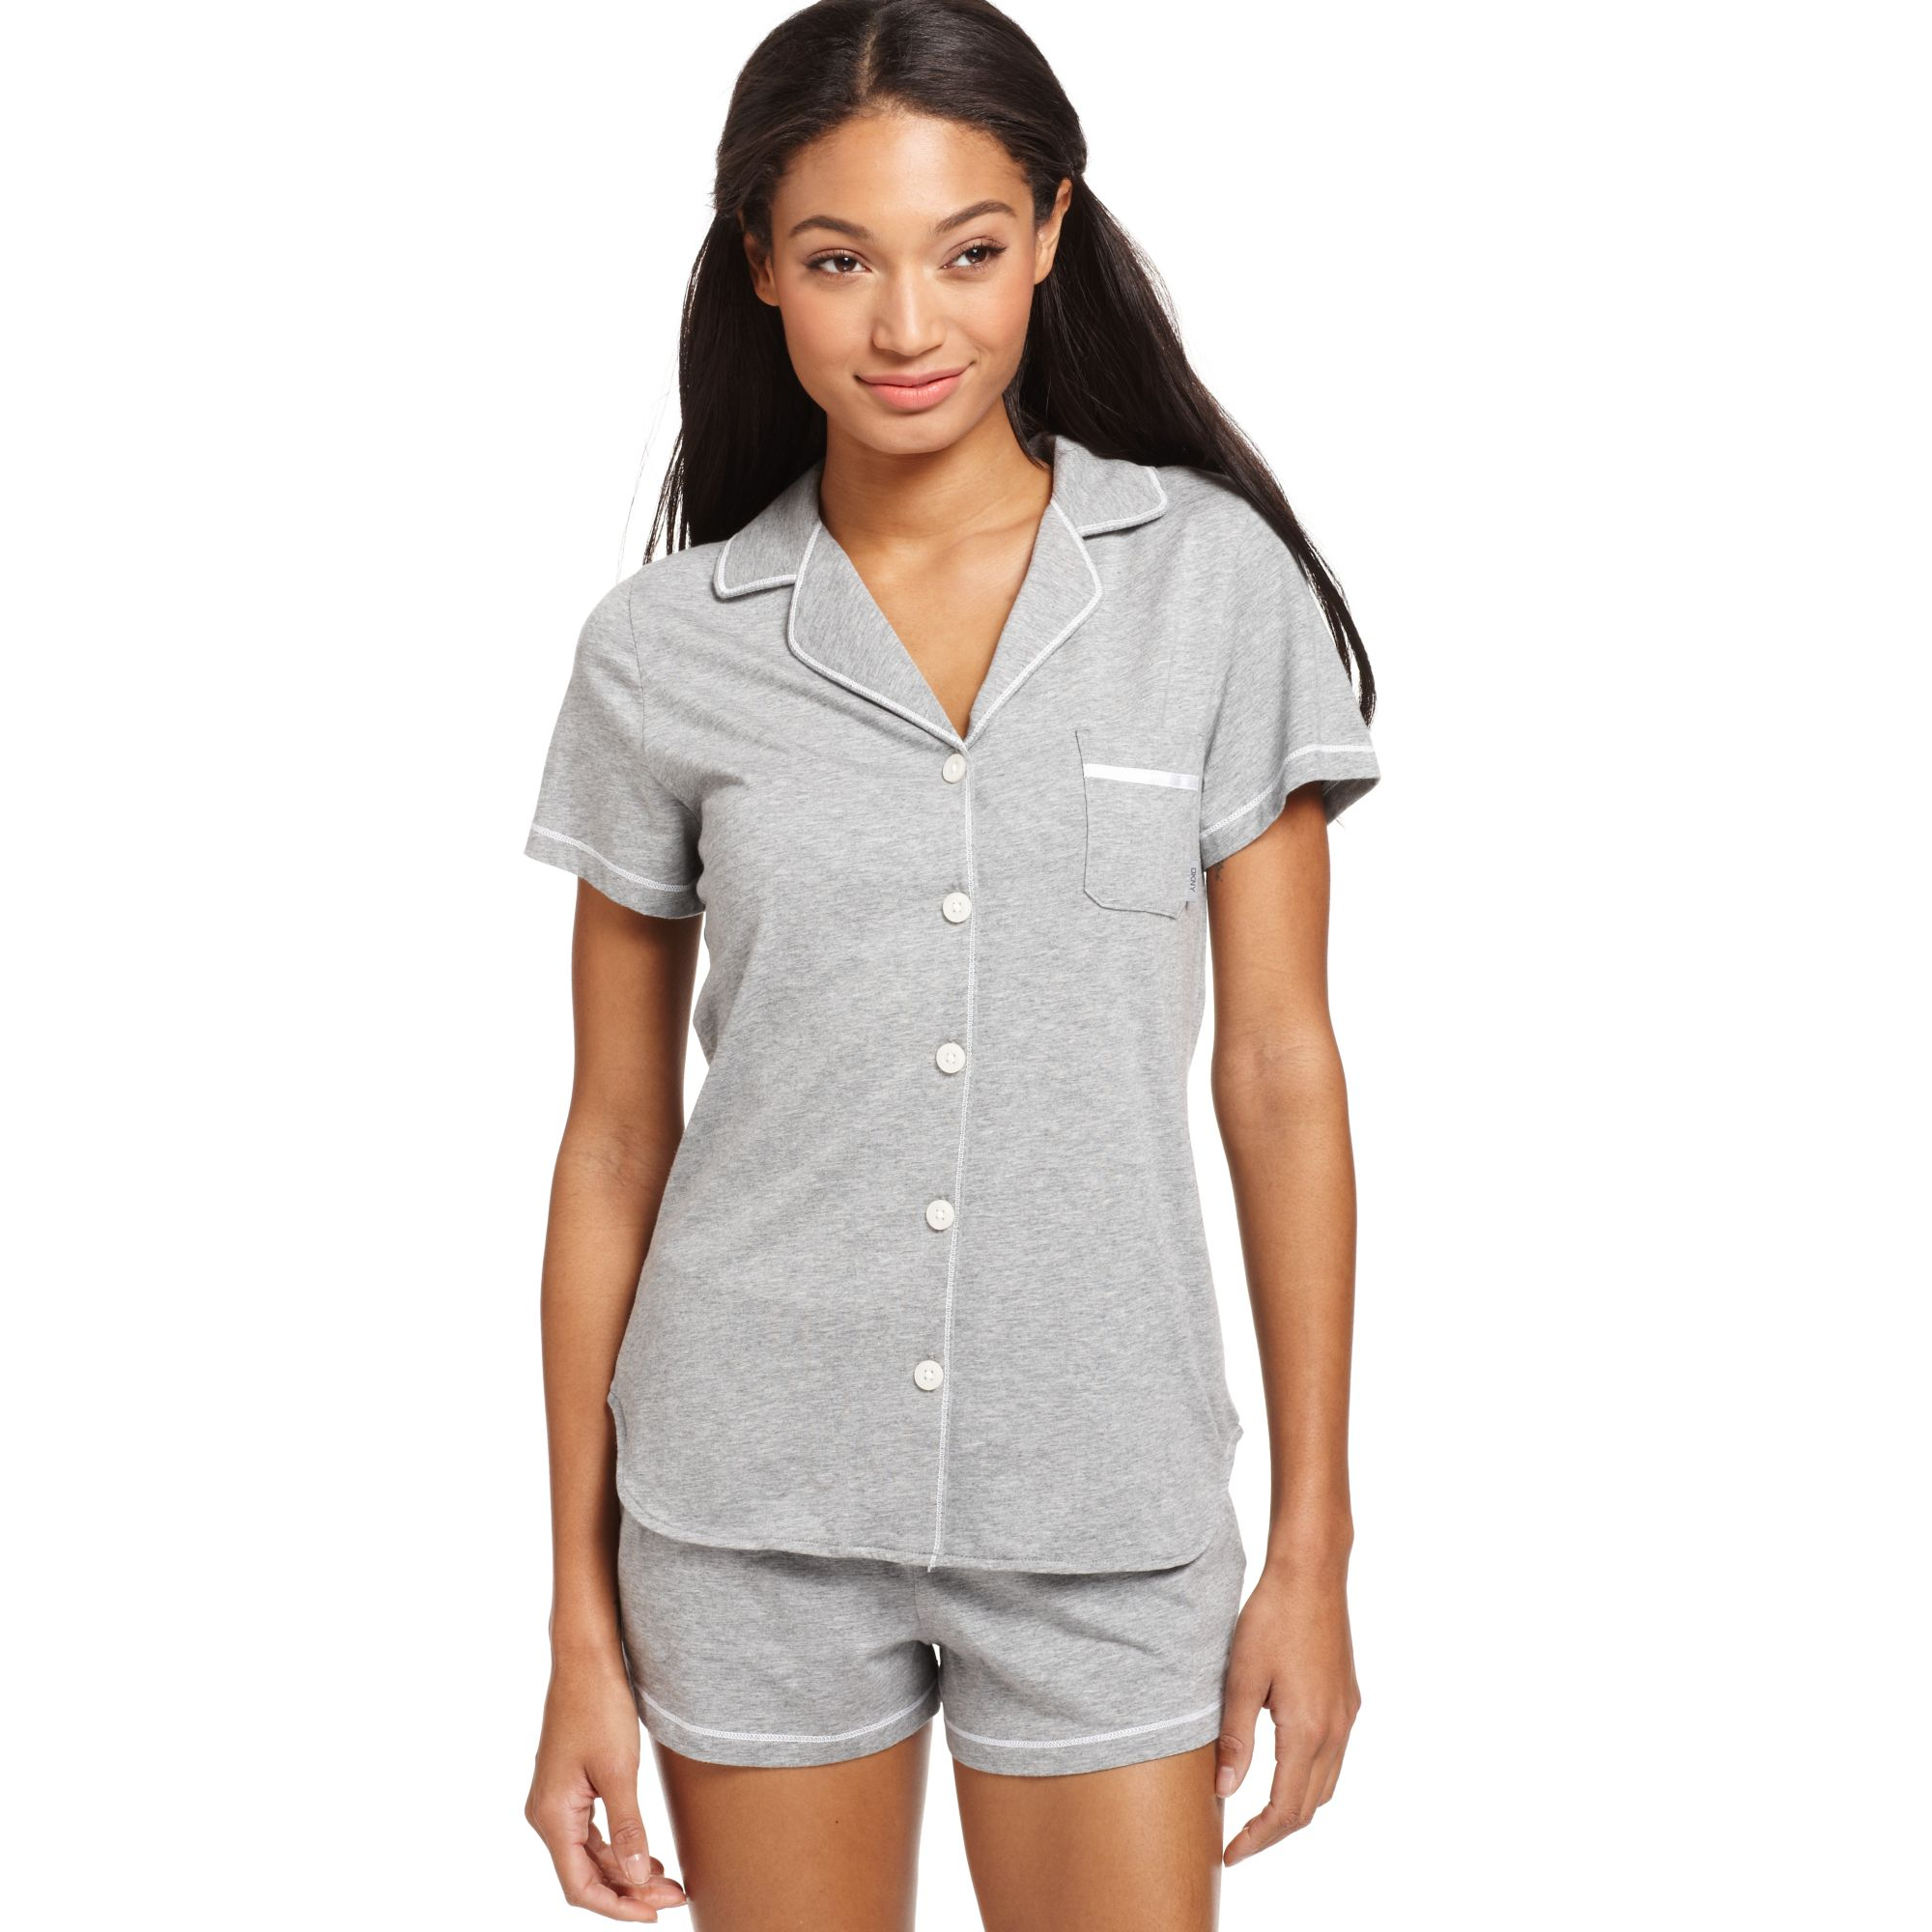 Lyst - Dkny Short Sleeve Top and Boxers Pajamas Set in Gray